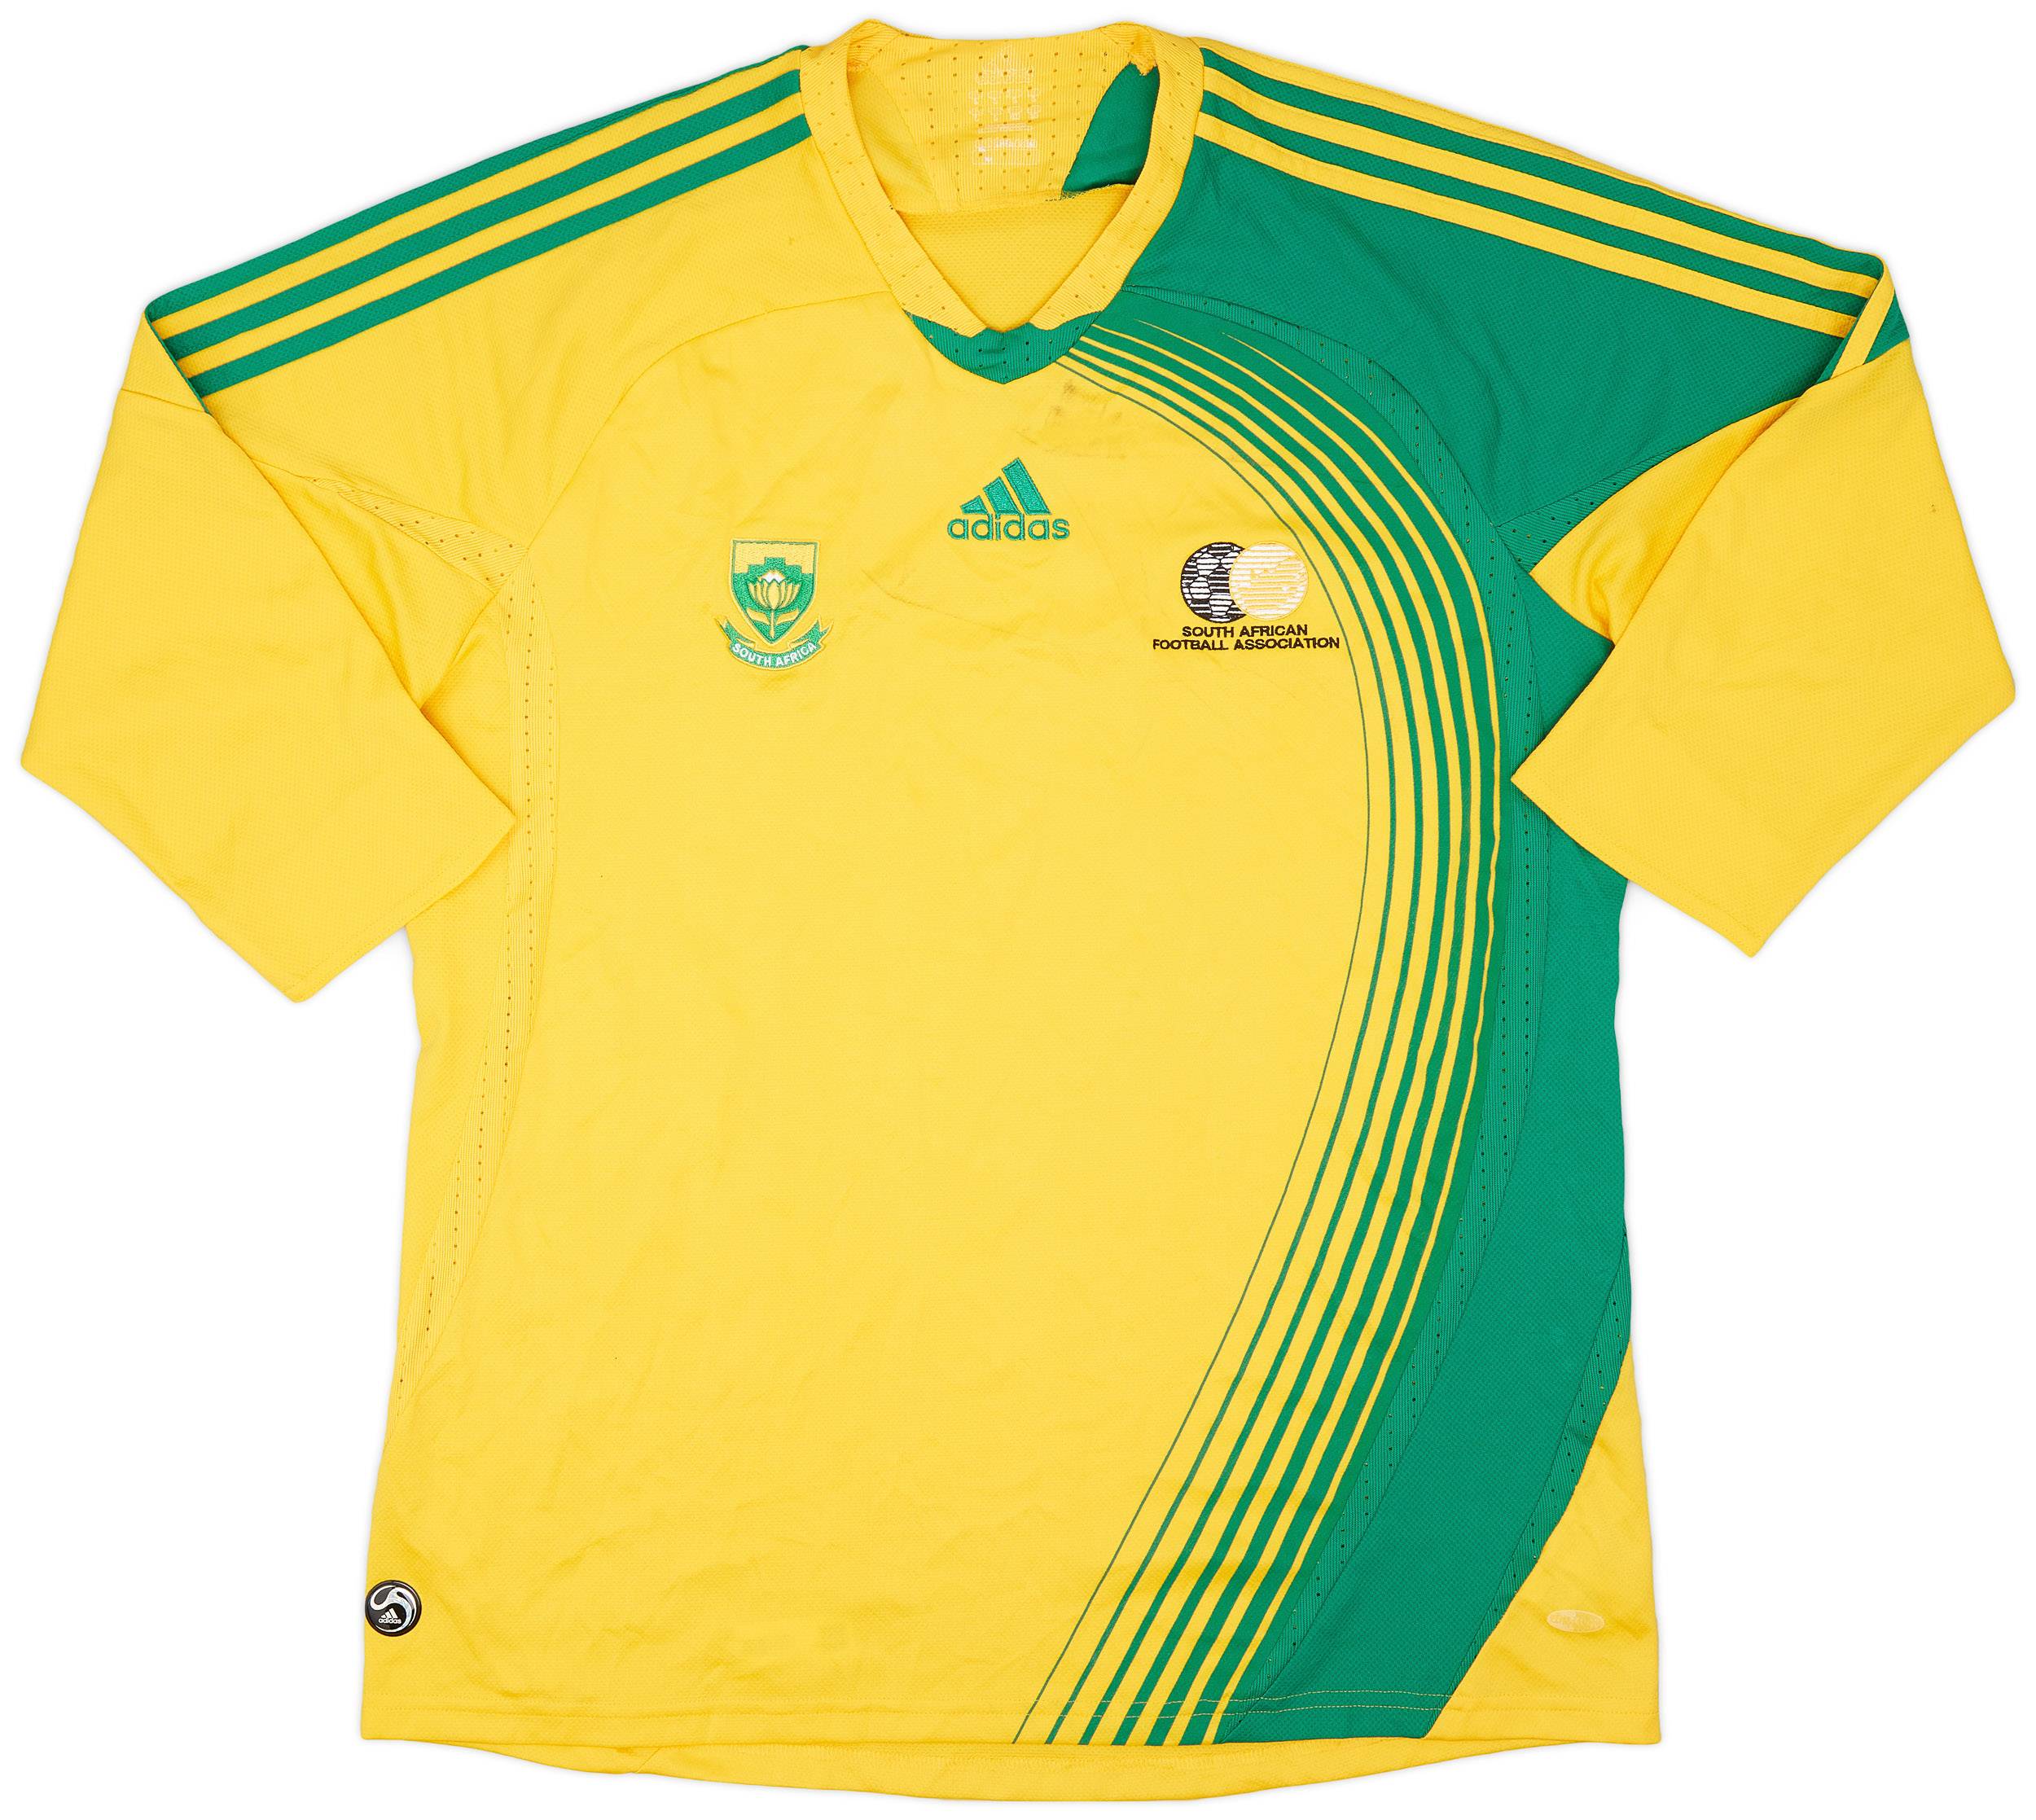 2009-10 South Africa Home Shirt - 6/10 - (L)